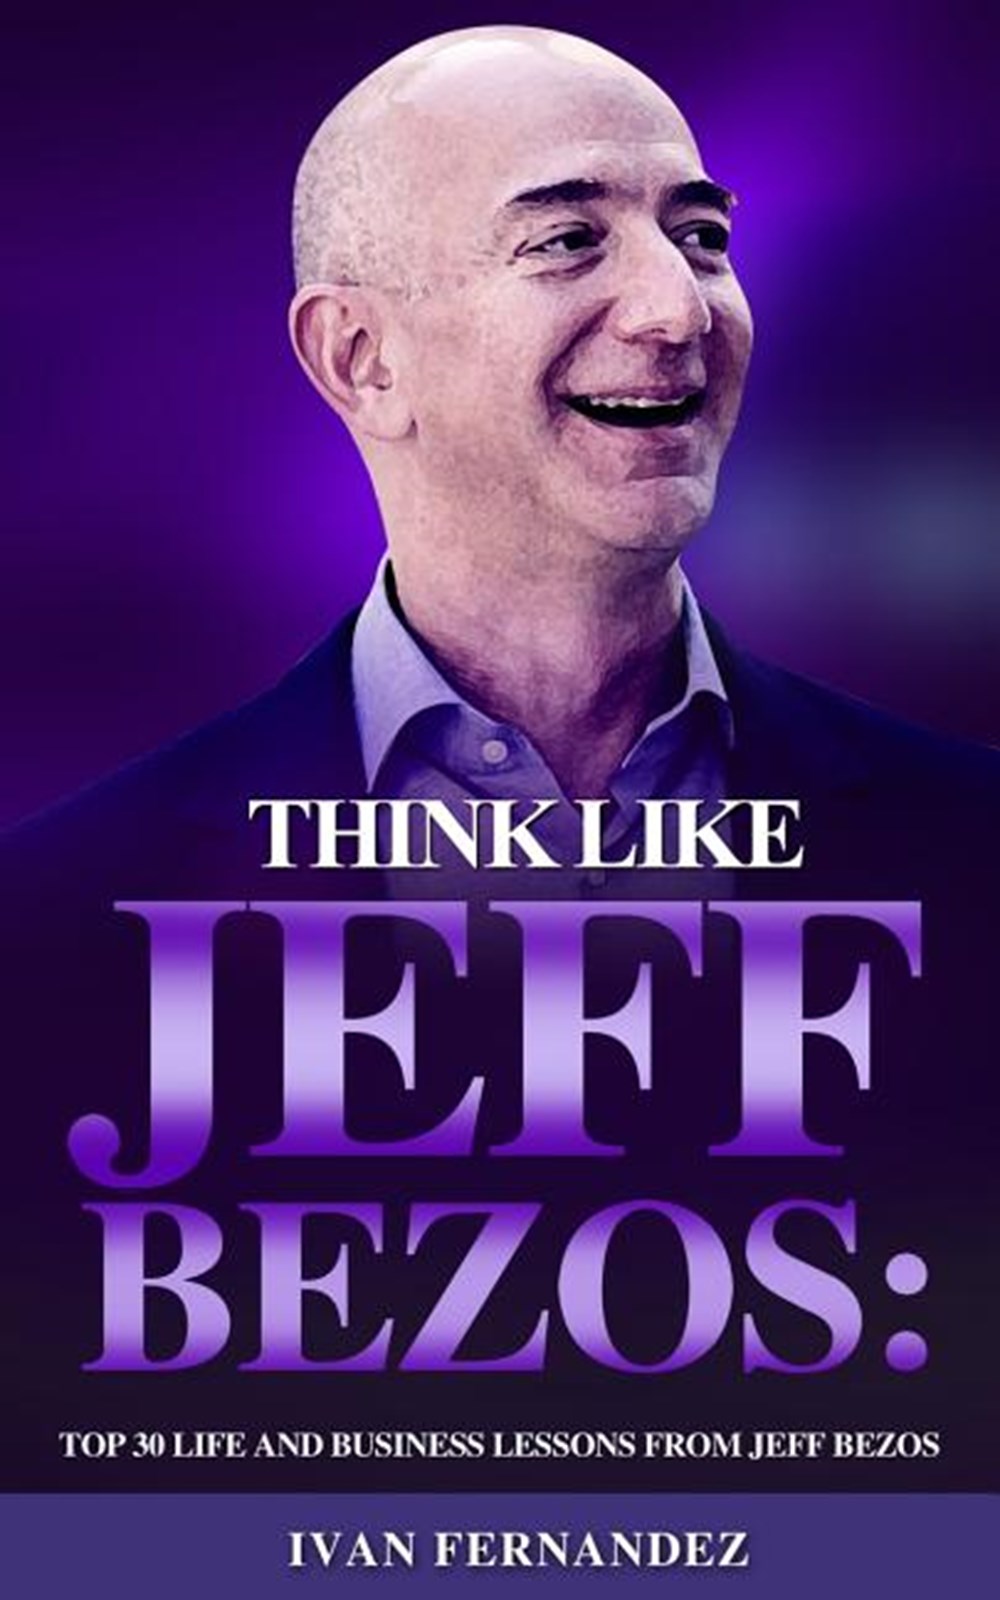 Think Like Jeff Bezos Top 30 Life and Business Lessons from Jeff Bezos